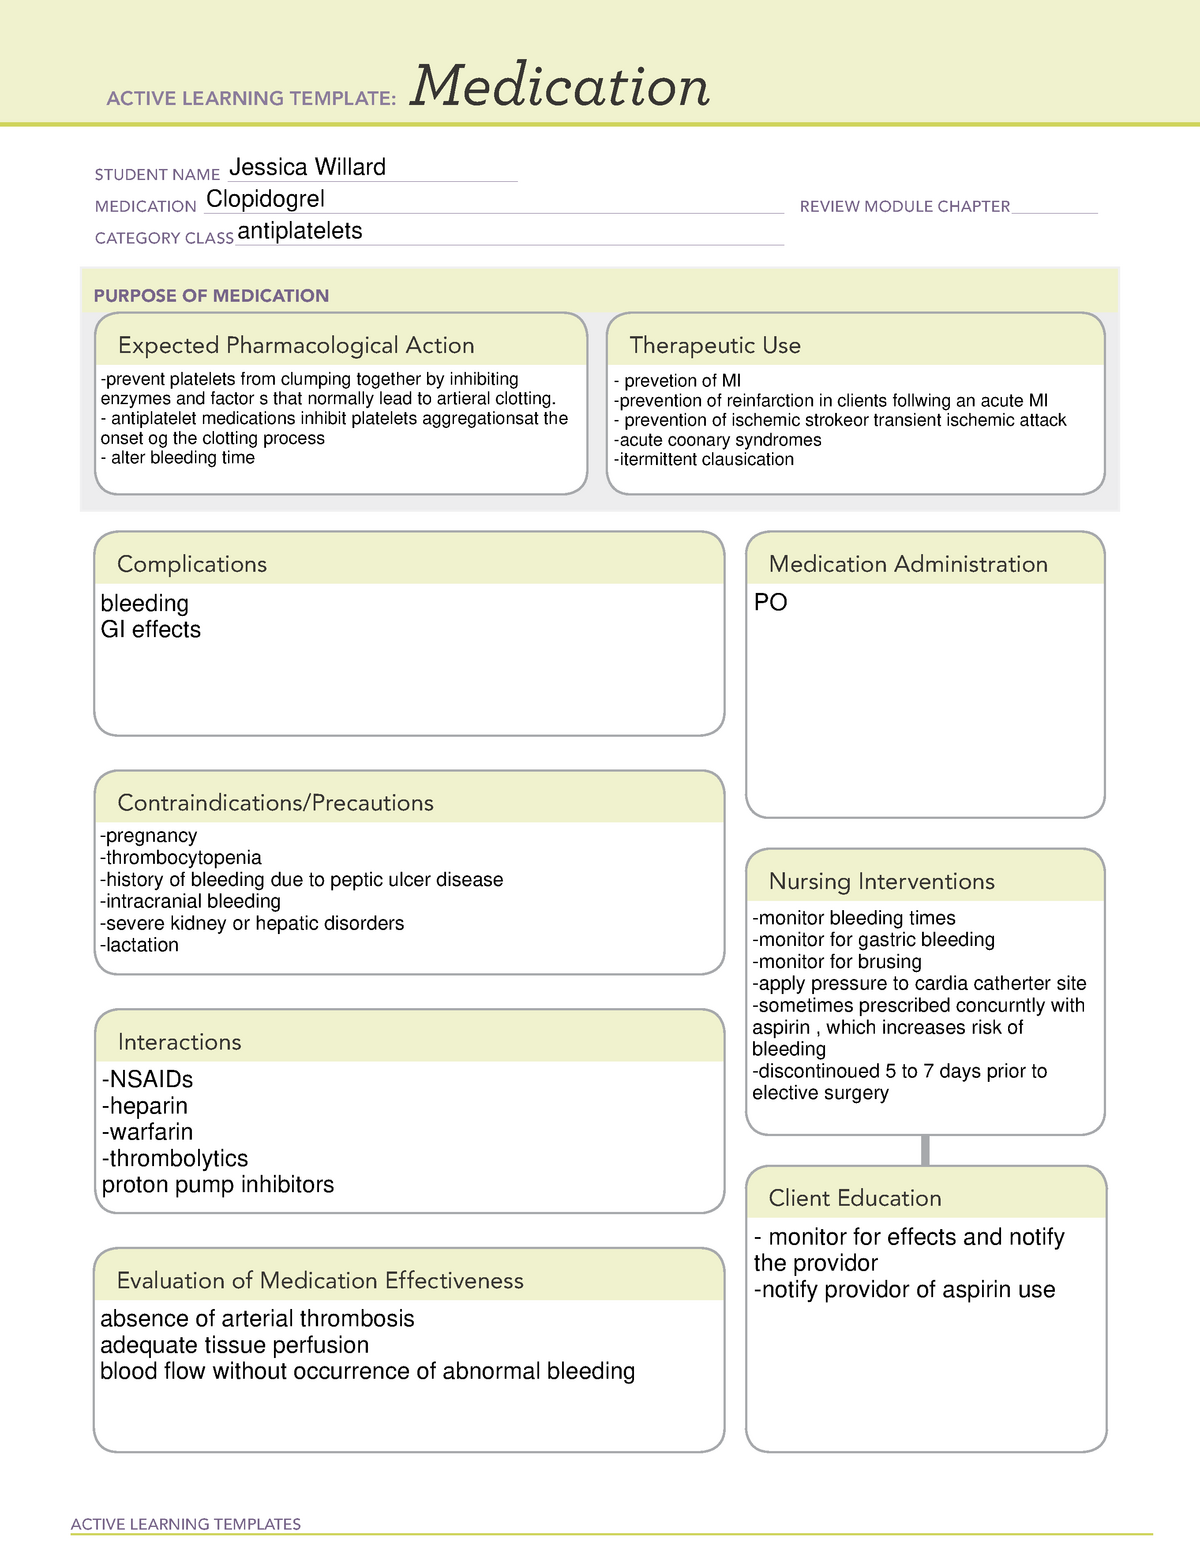 Clopidogrel ati learning templete ACTIVE LEARNING TEMPLATES